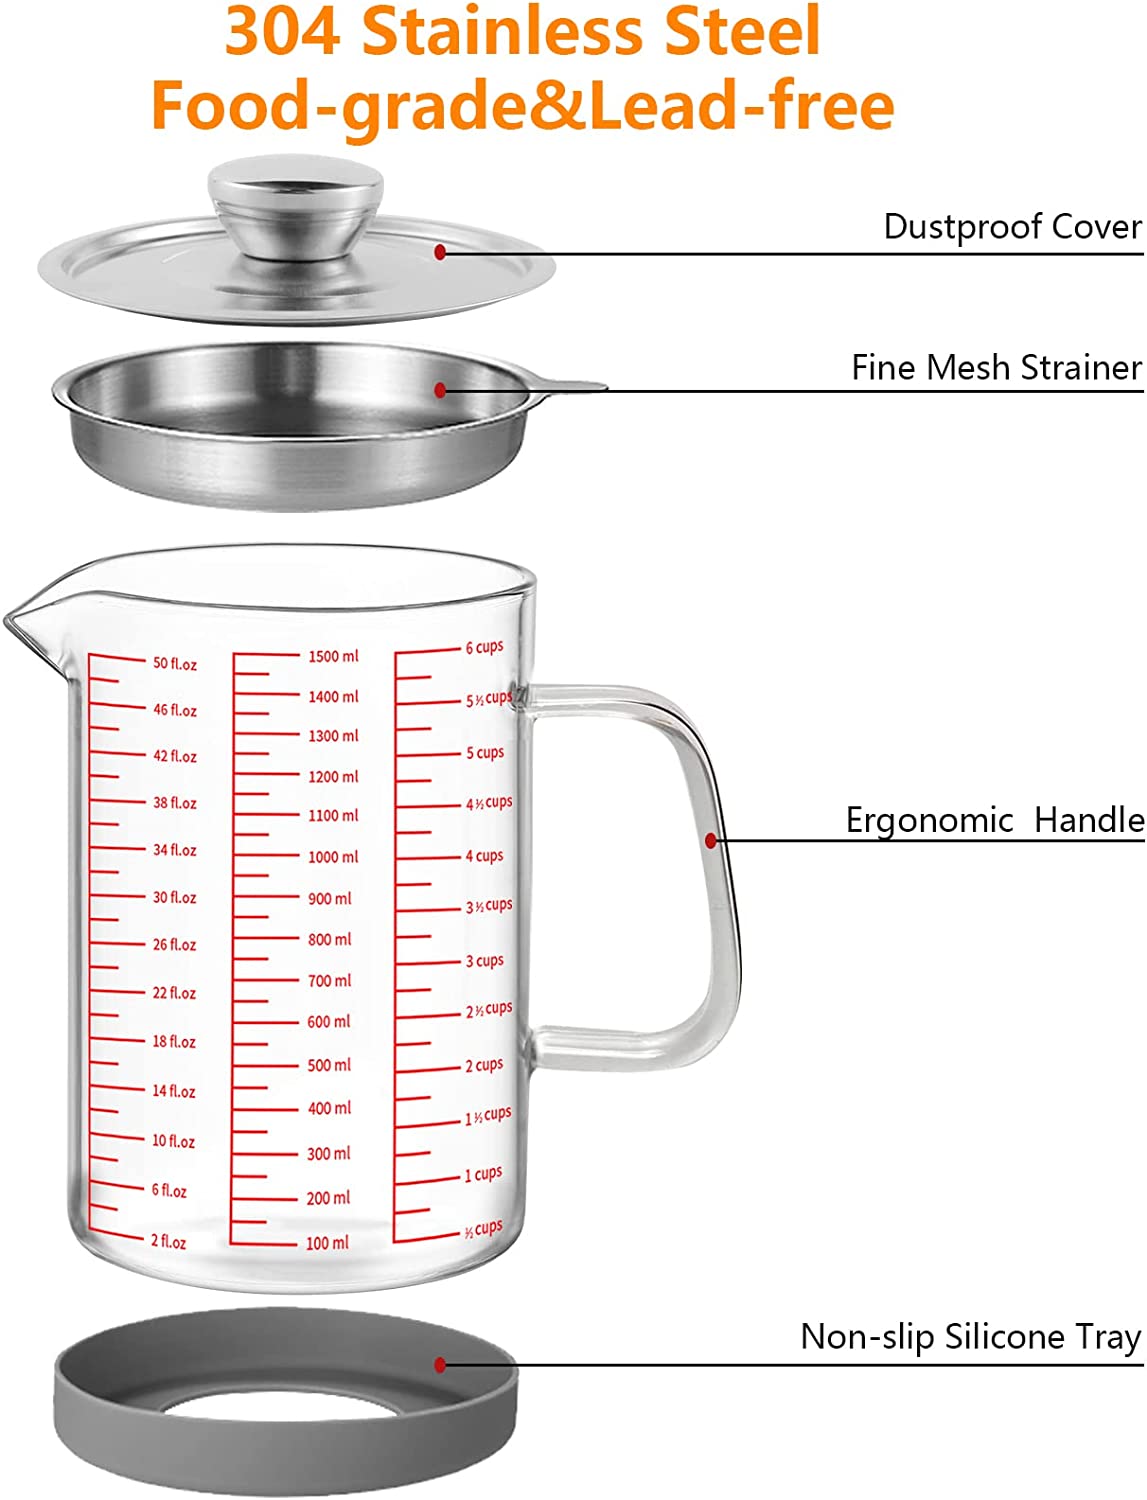 Luvan 50oz/6 Cups Glass Measuring Cup, Easy to Read with 3 measurement  scales (Ml/Oz/Cup), Insulated Handle and V-shaped Spout, High Borosilicate